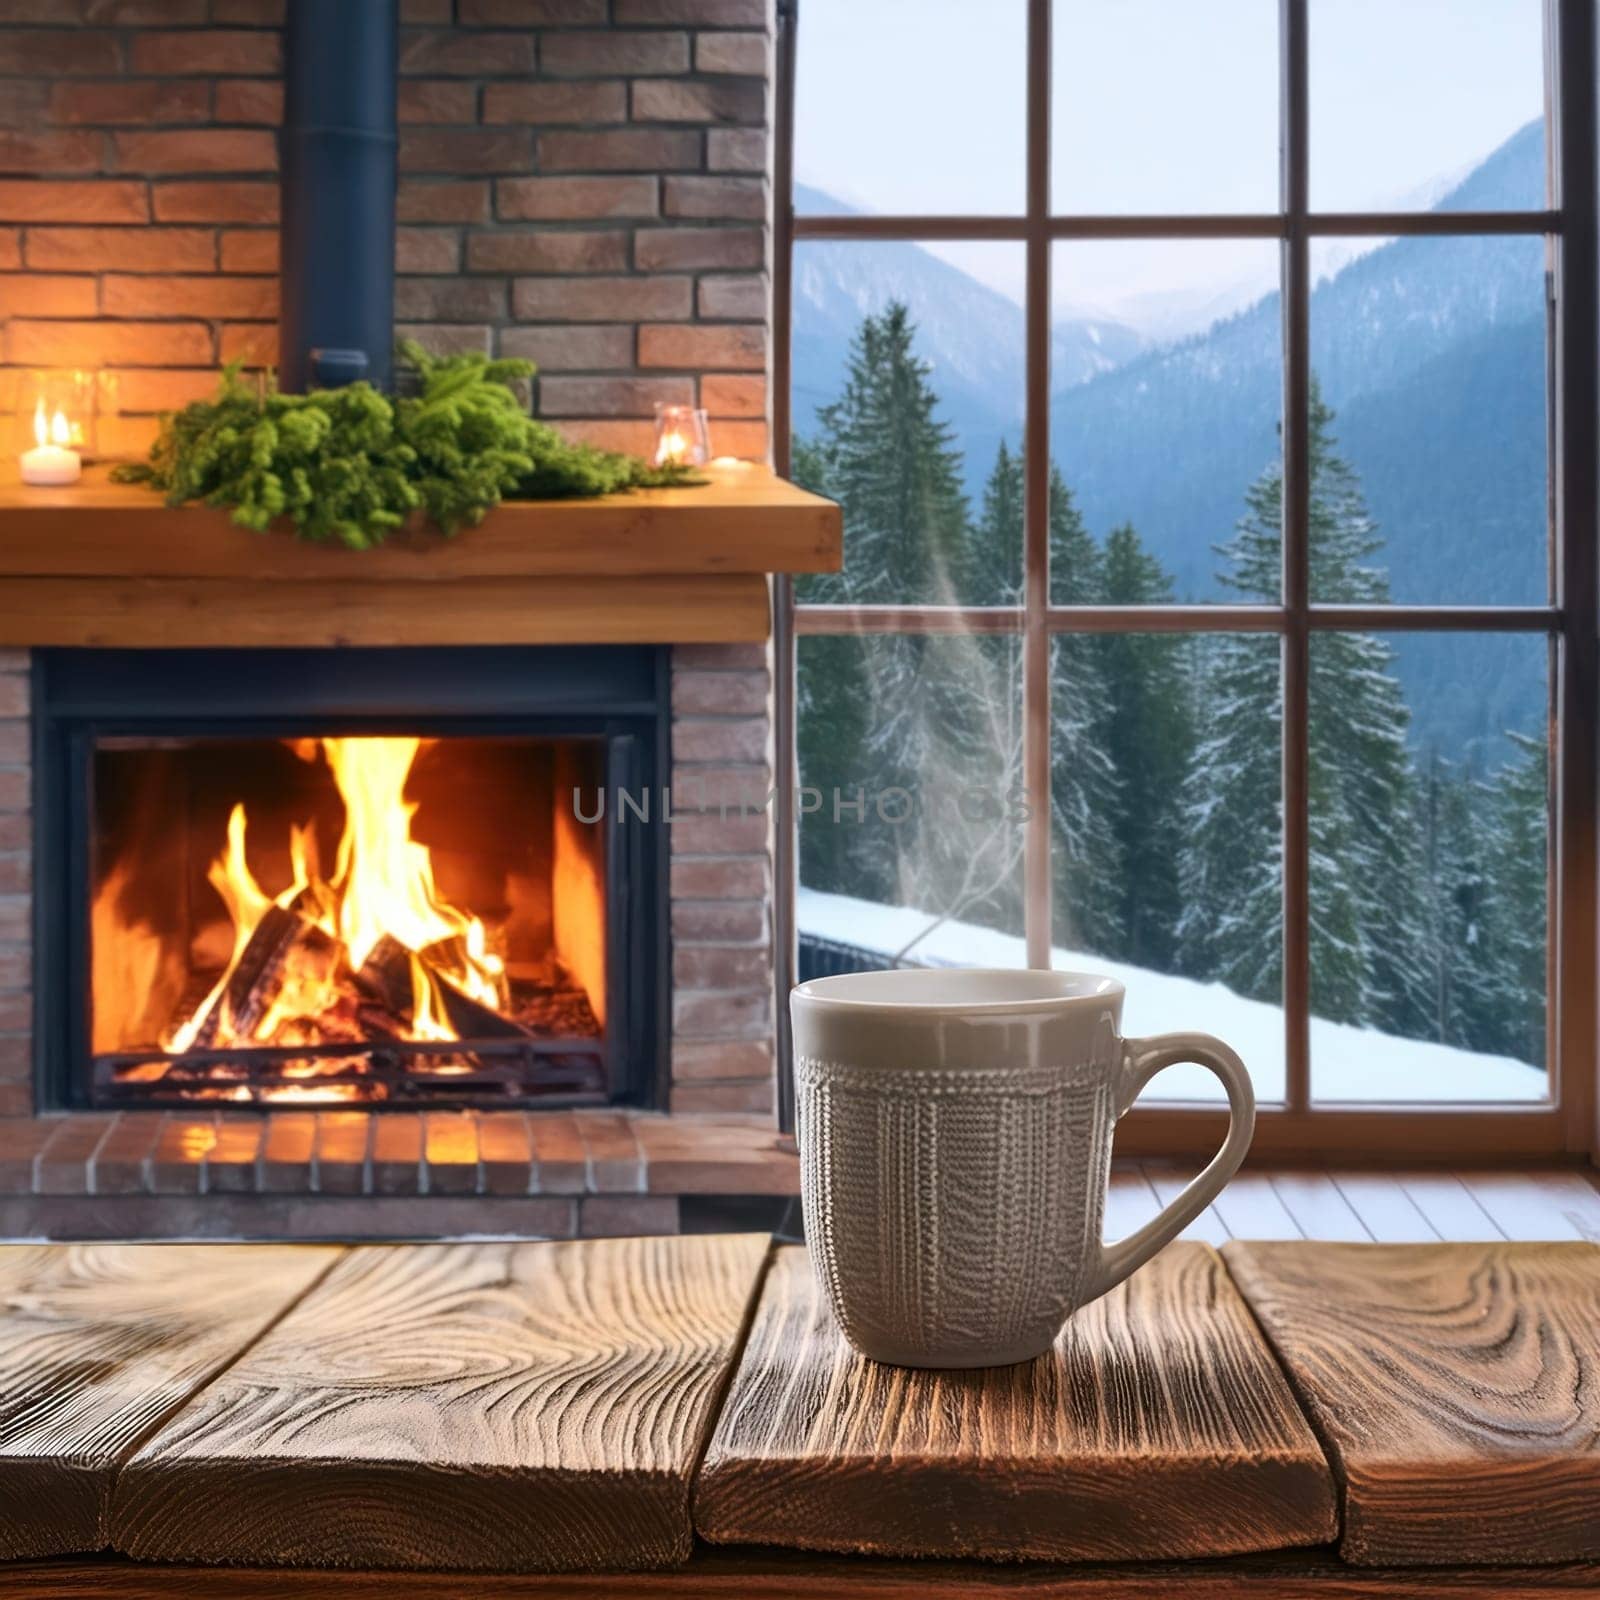 Wood is burning in the cottage fireplace. Winter wooded mountains outside the window. A cup stands on a wooden table. Steam rises from a hot drink. AI generated